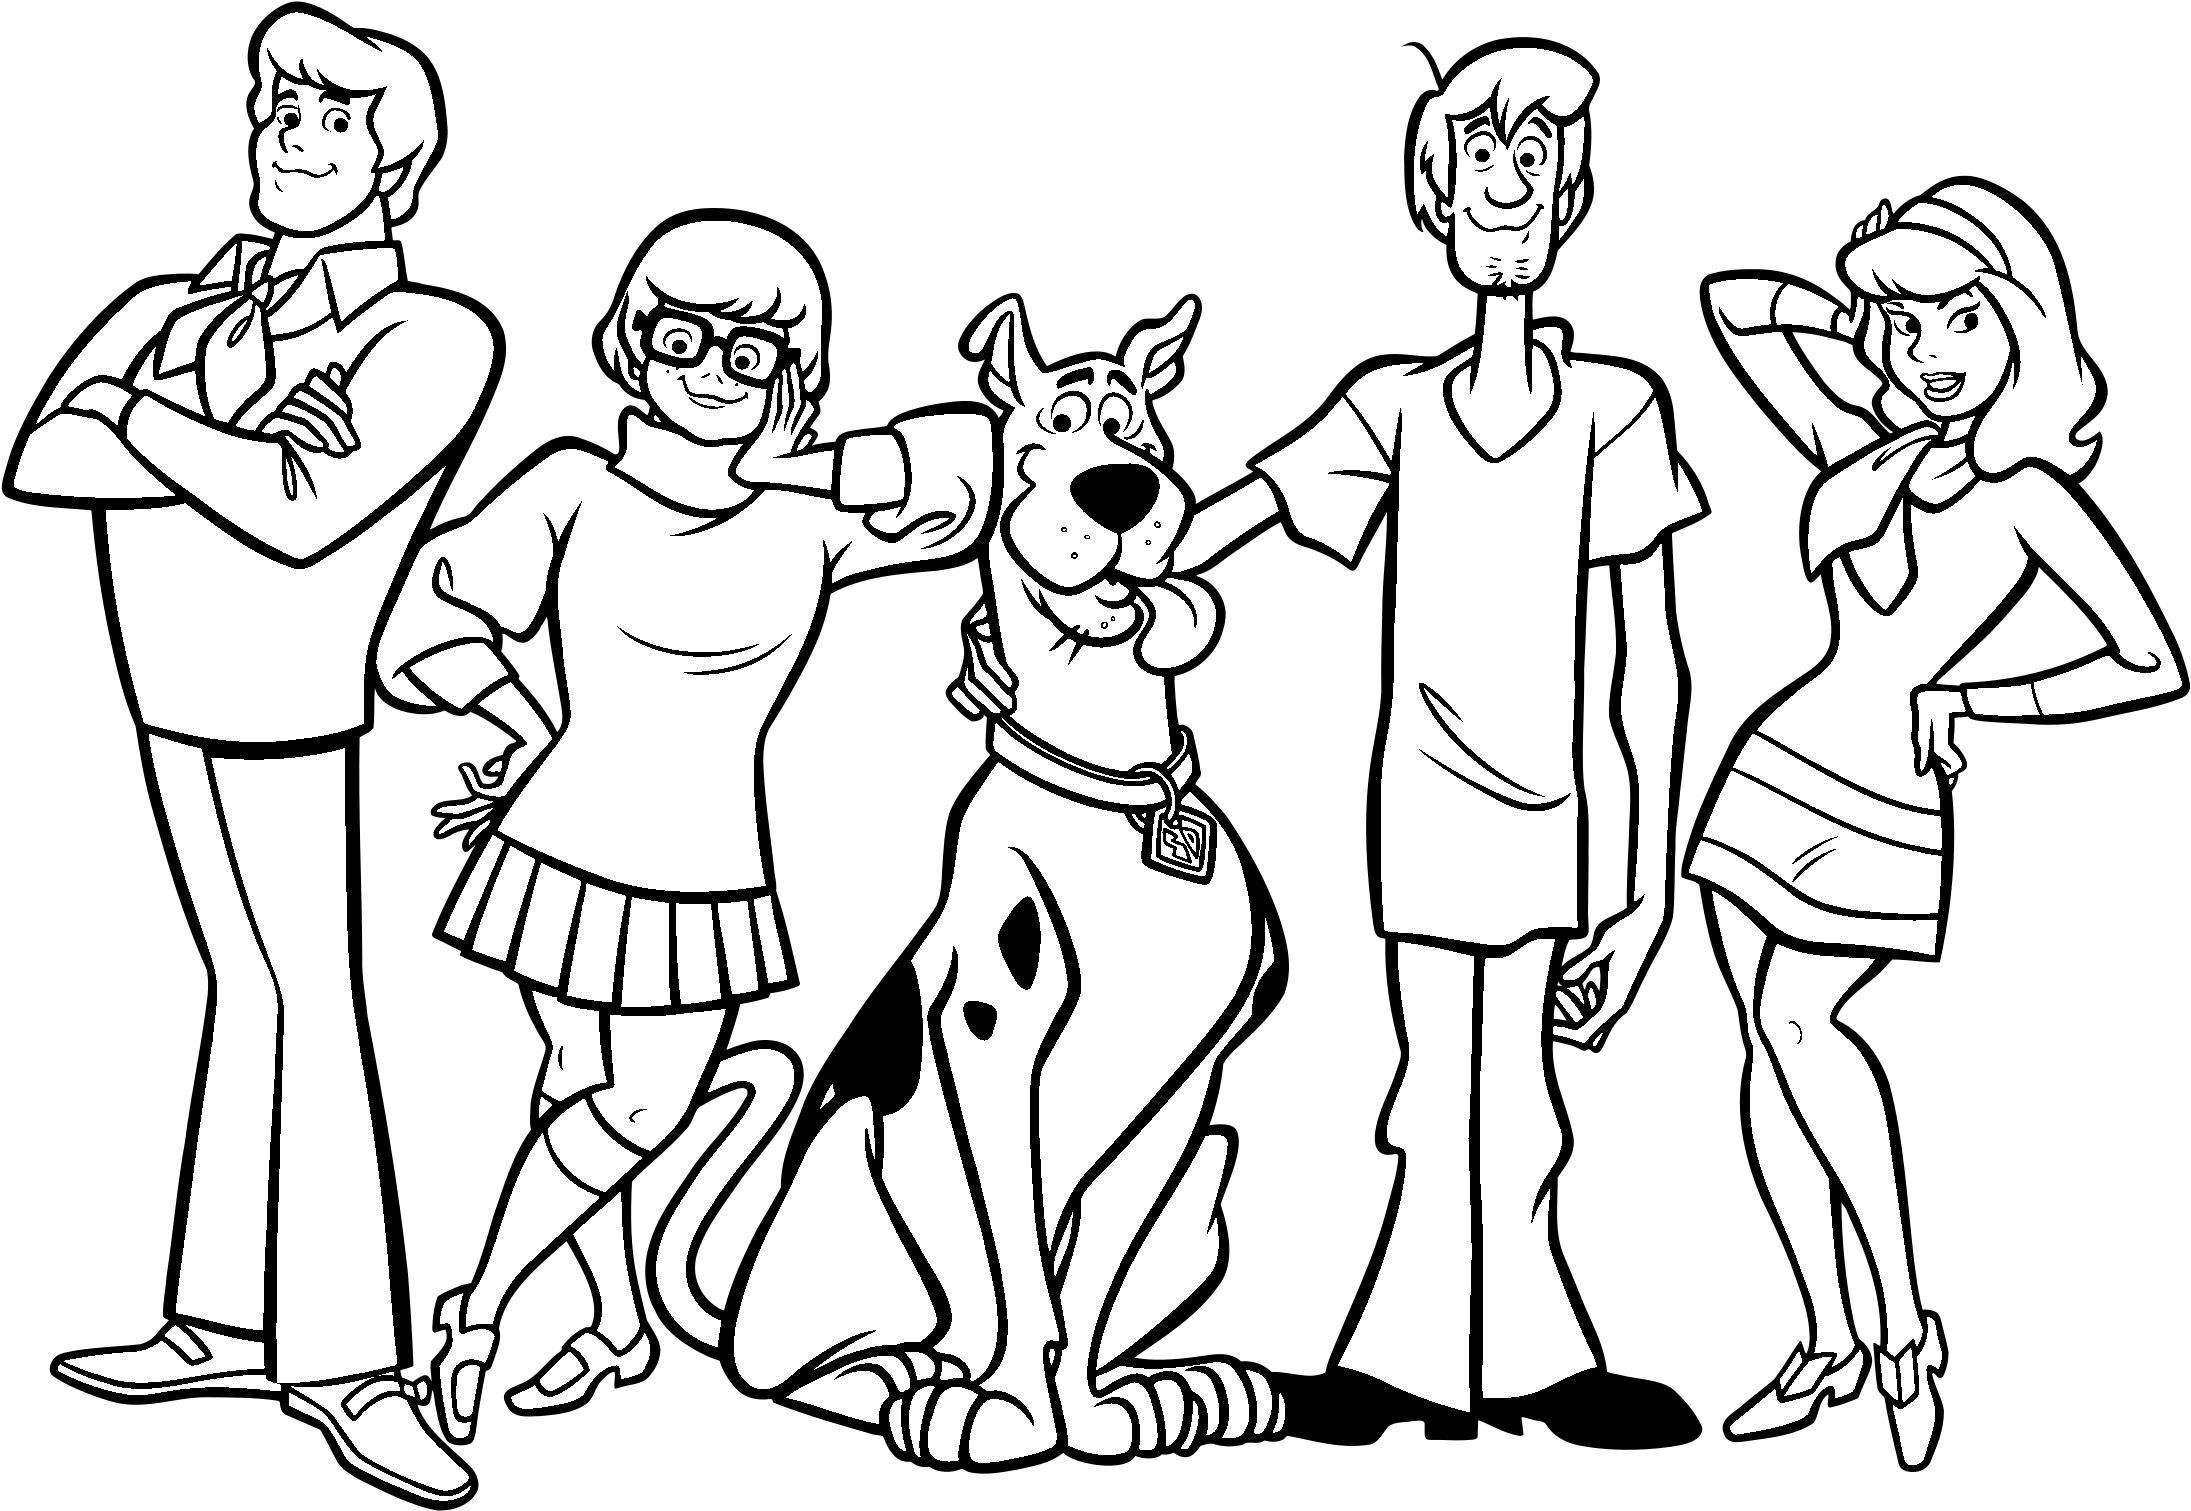 Scooby doo clipart black and white, Scooby doo black and white